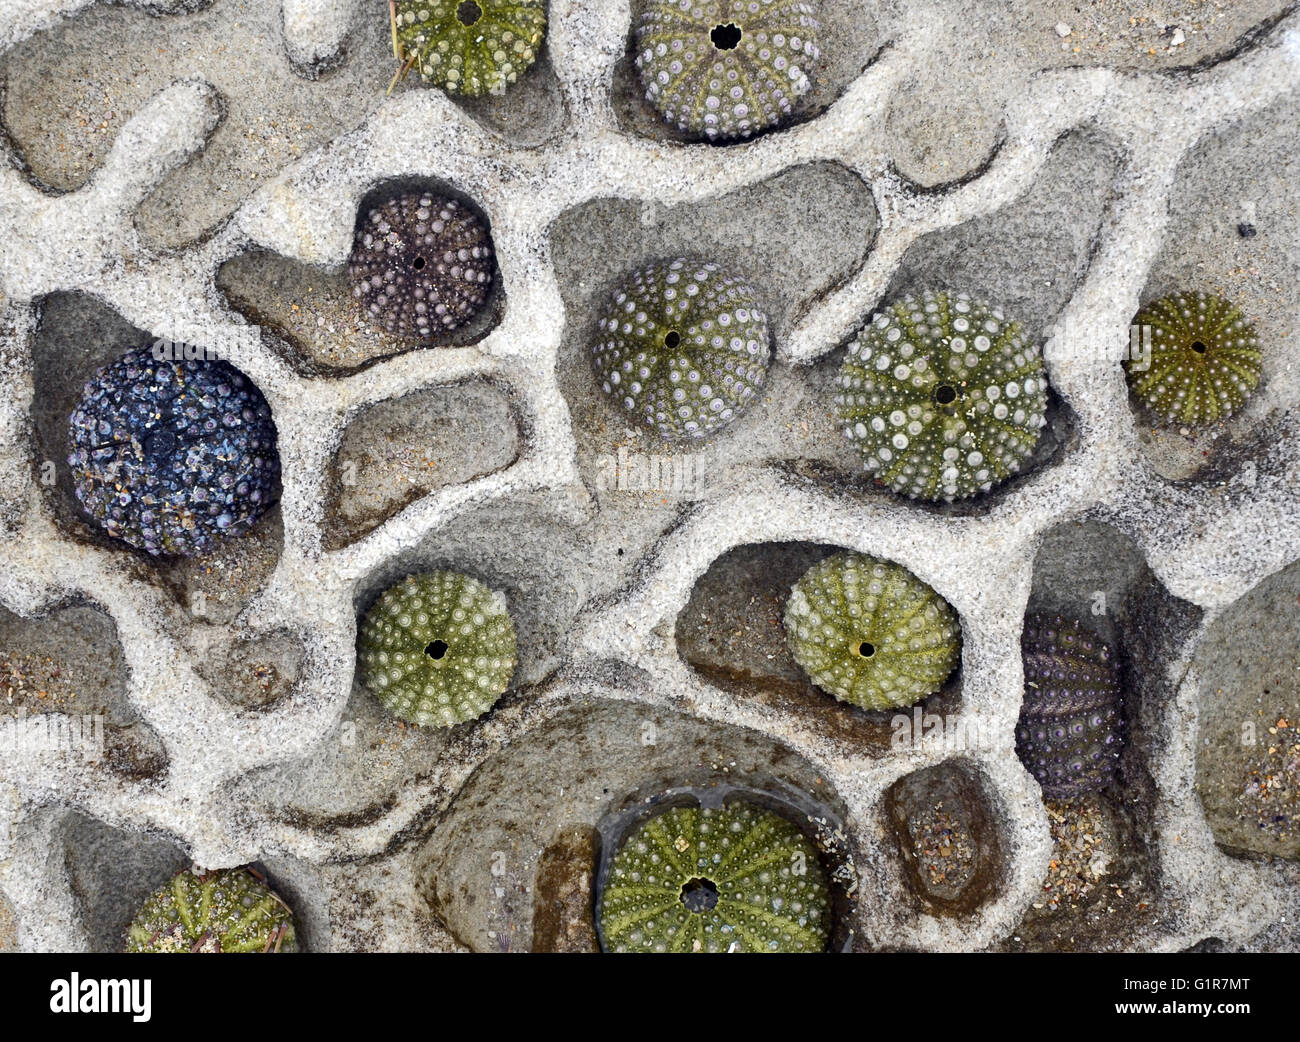 Collection of colorful Sea Urchin shells arranged on a weathered, brain-like sandstone rock at the seaside Stock Photo